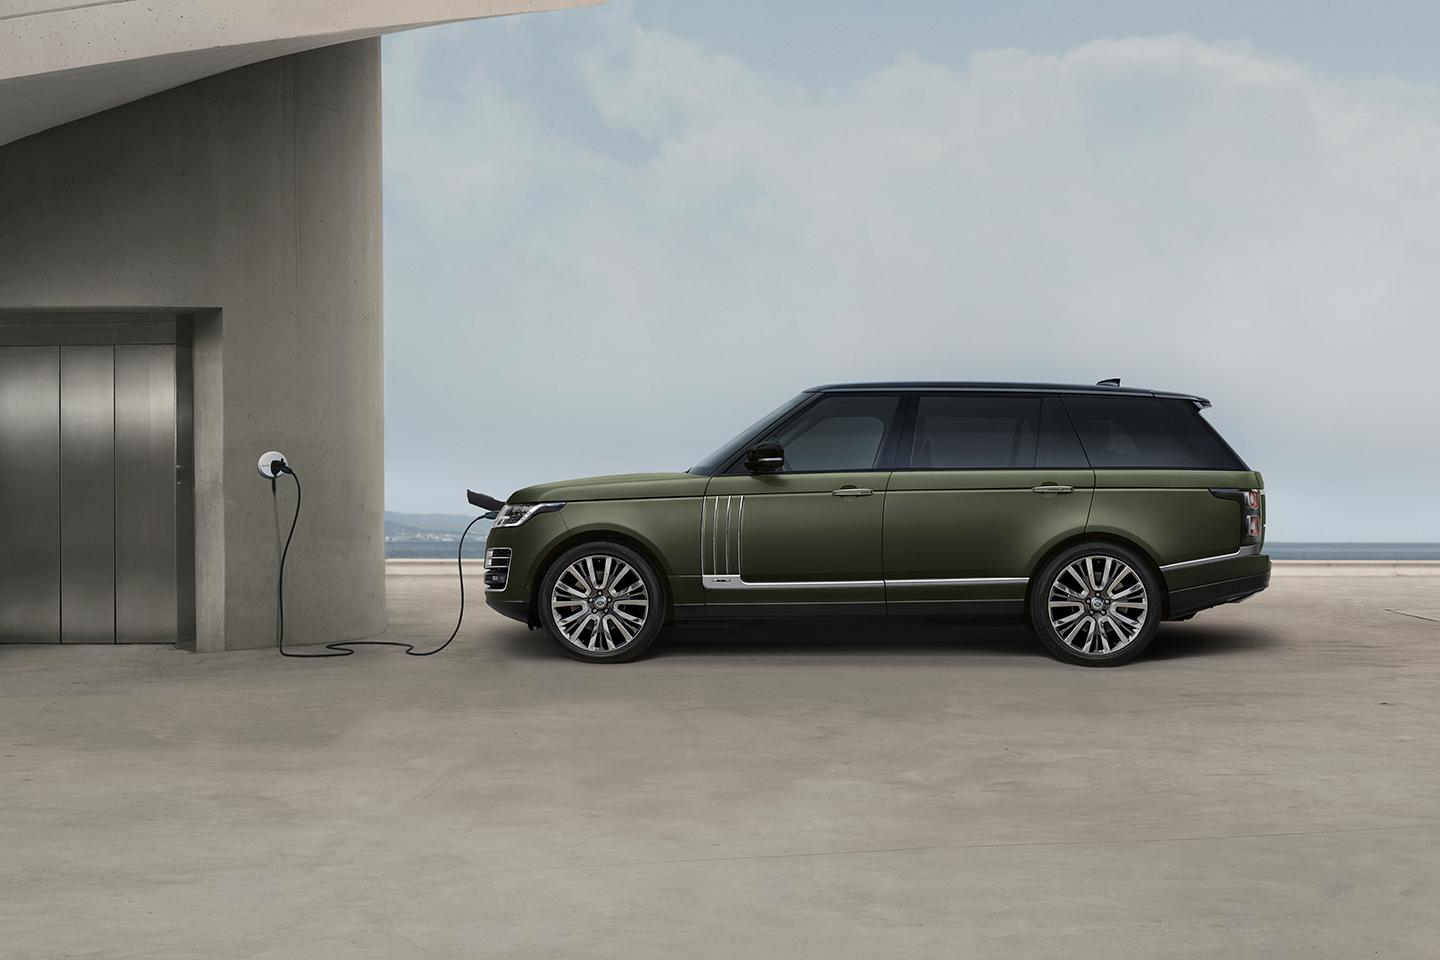 Range Rover SV Autobiography Ultimate Edition